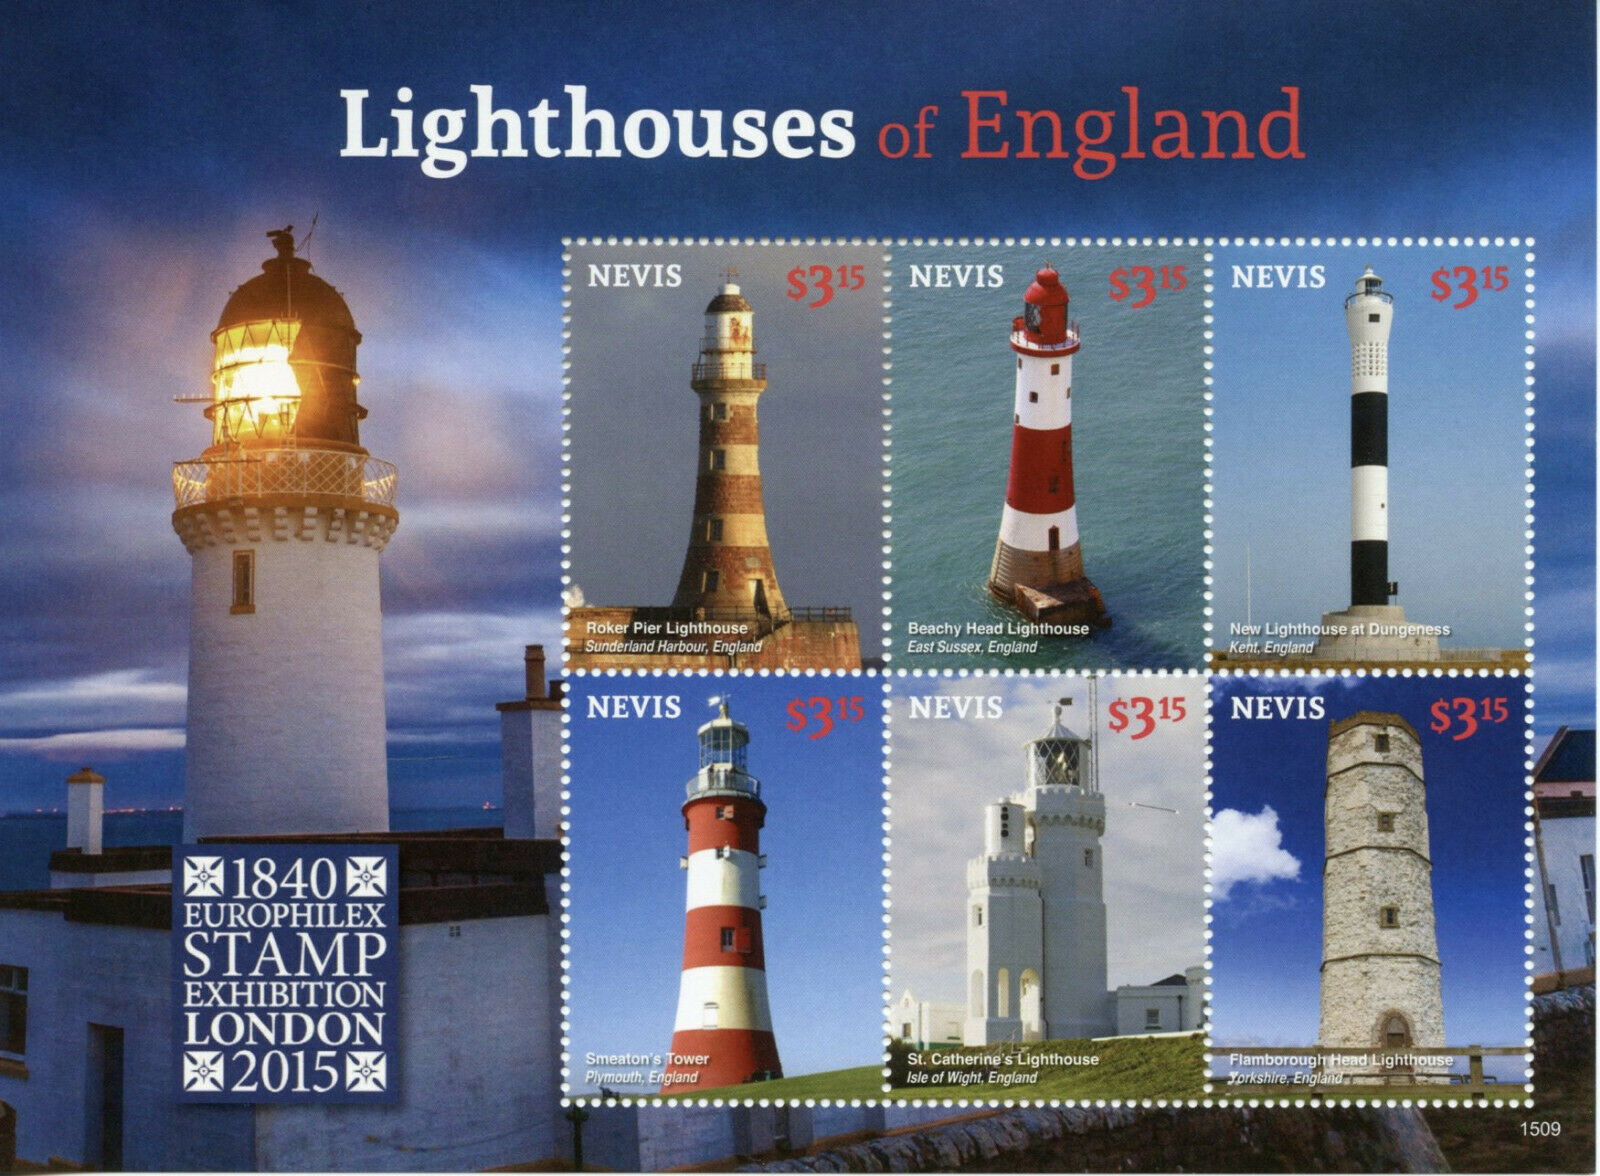 Nevis 2015 MNH Architecture Stamps Lighthouses of England Europhilex Roker Pier 6v M/S